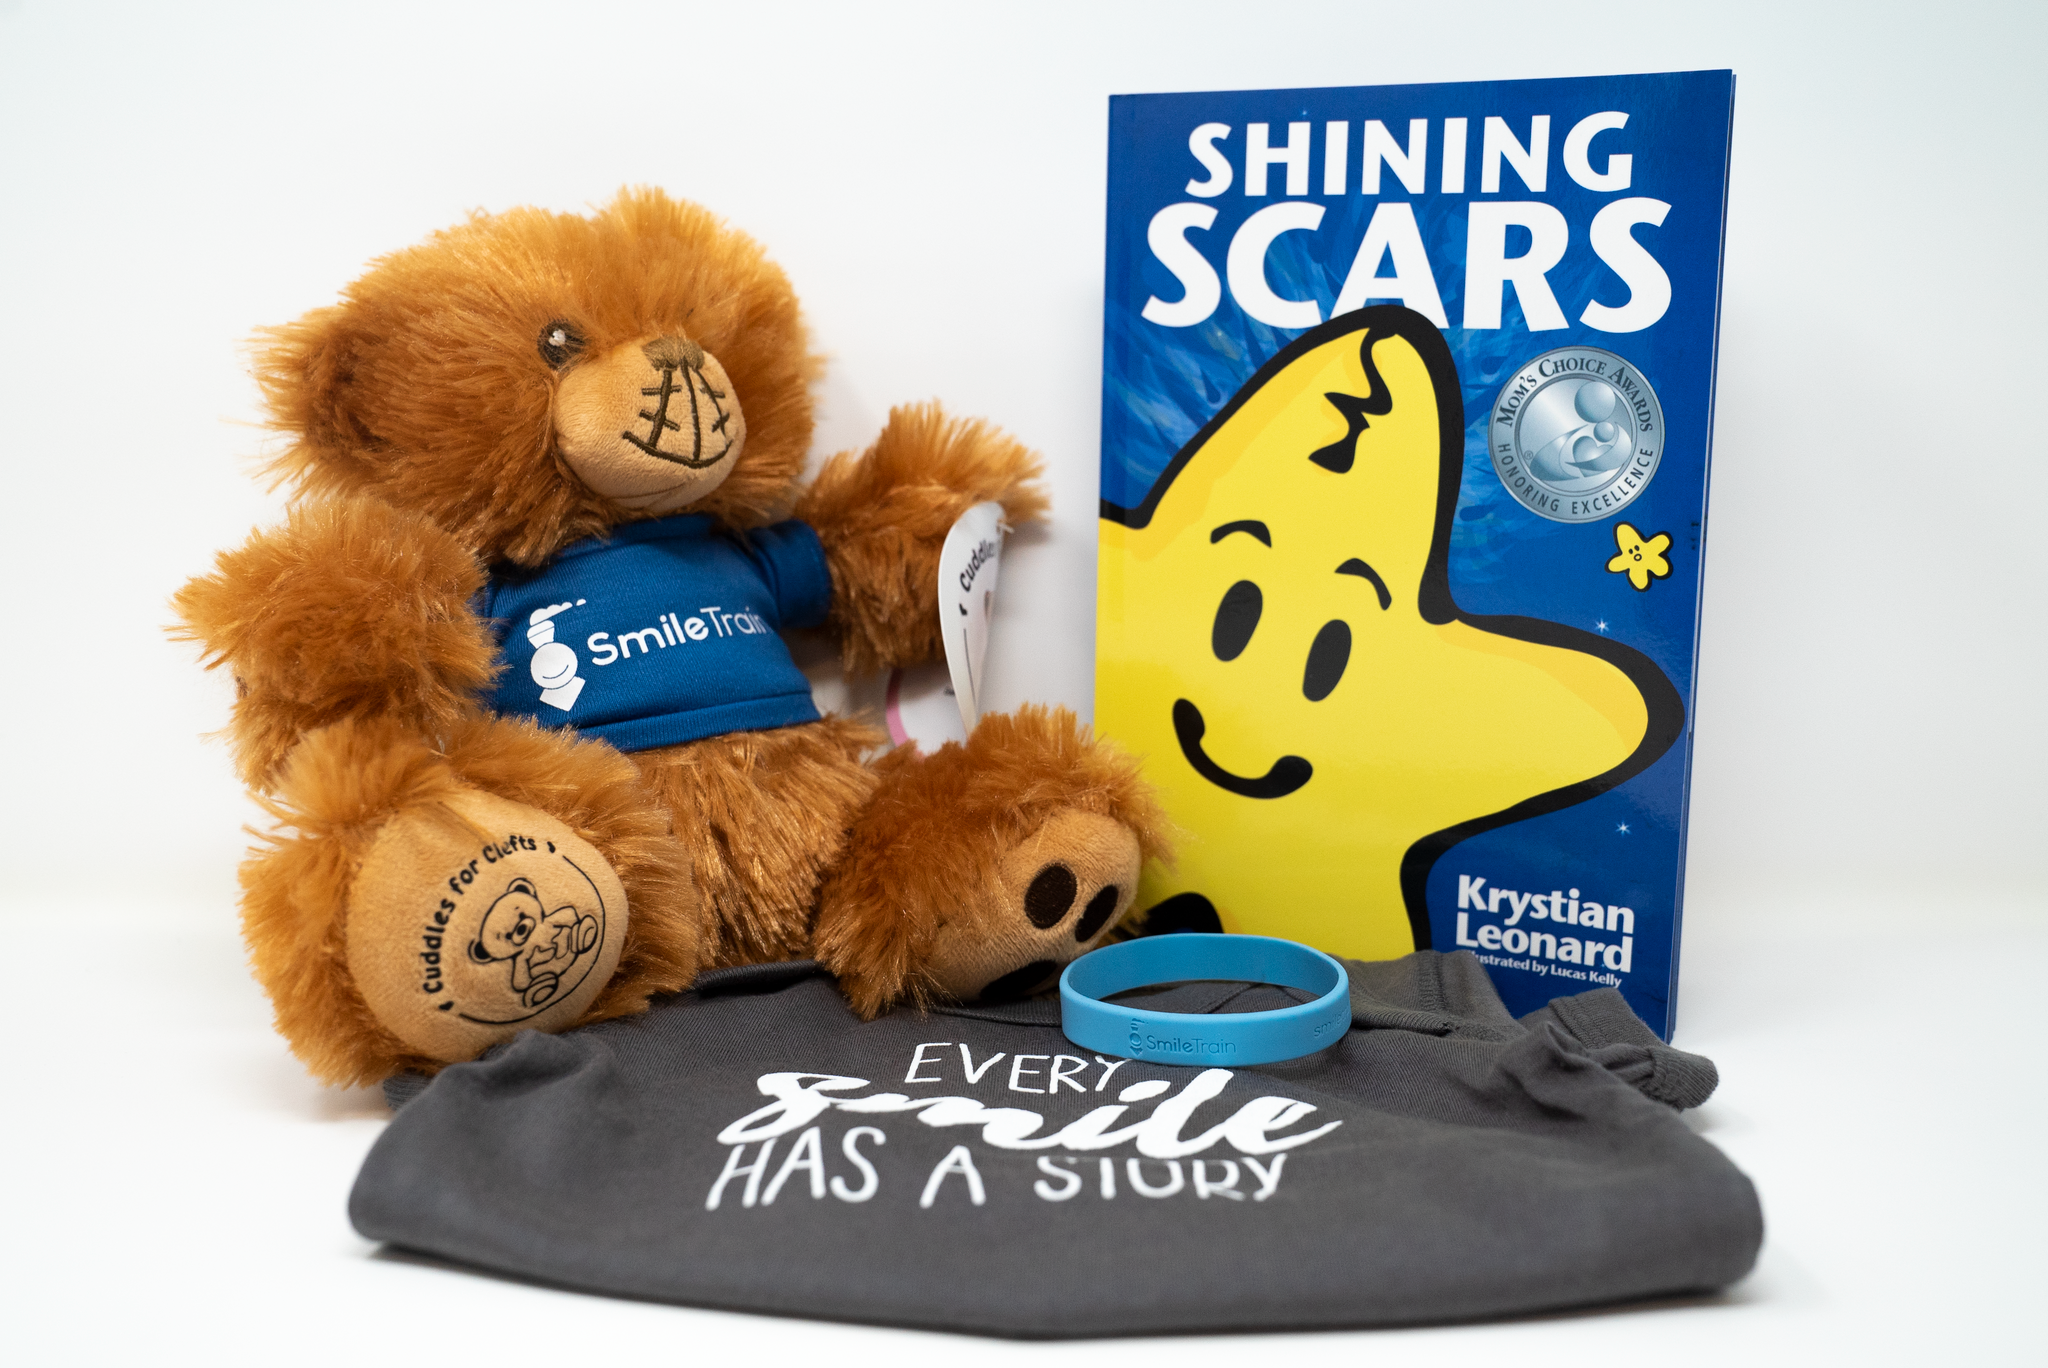 a care package from cuddles for clefts in partnership with smile train called smile train cuddle pack that features a stuffed animal, a book called "shining scars," a onesie that says "every smile has a story," and a blue bracelet